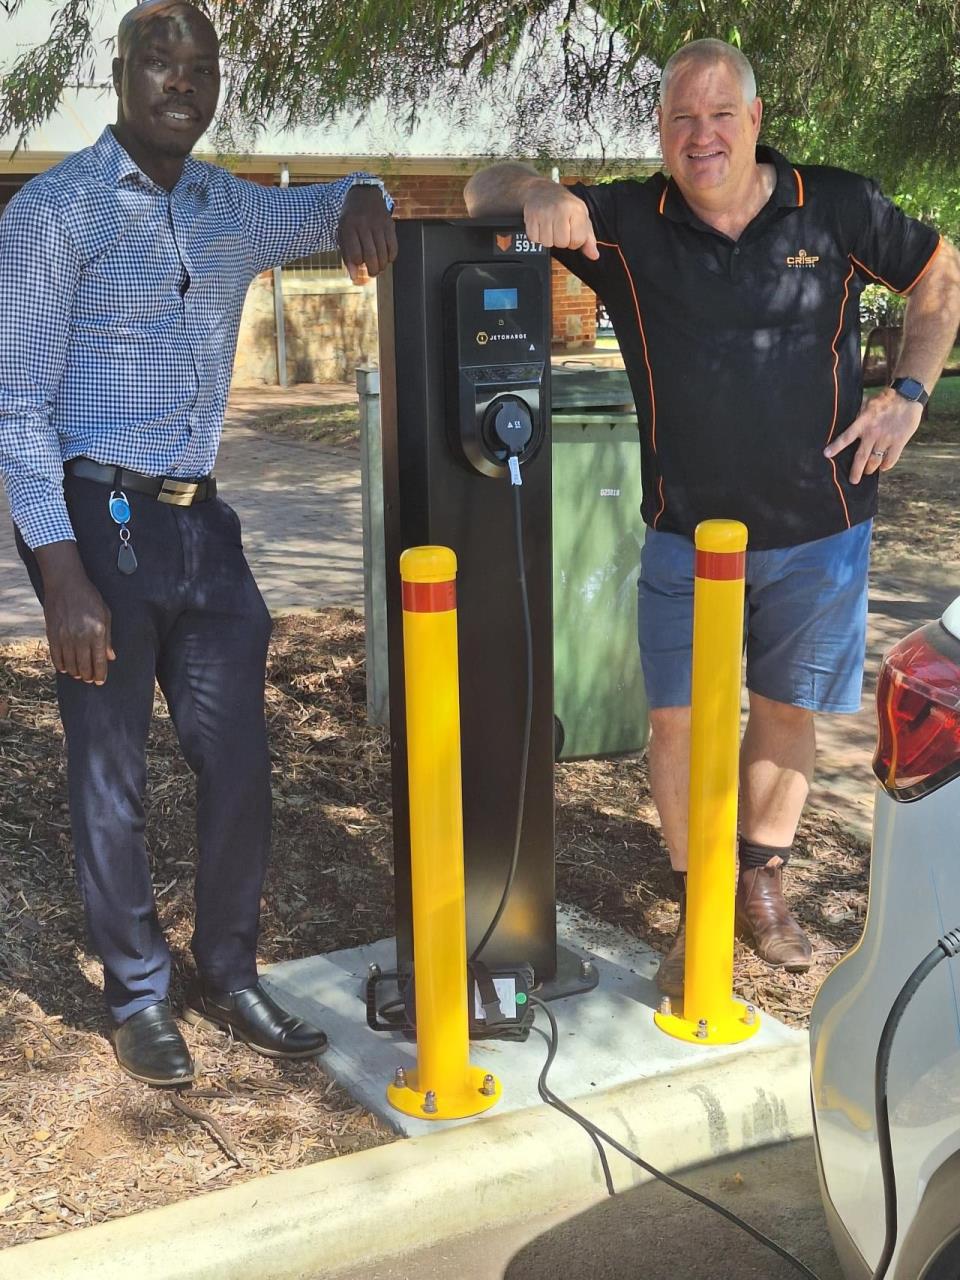 Media Release - Shire of Narrogin Introduces Electric Vehicle Charging